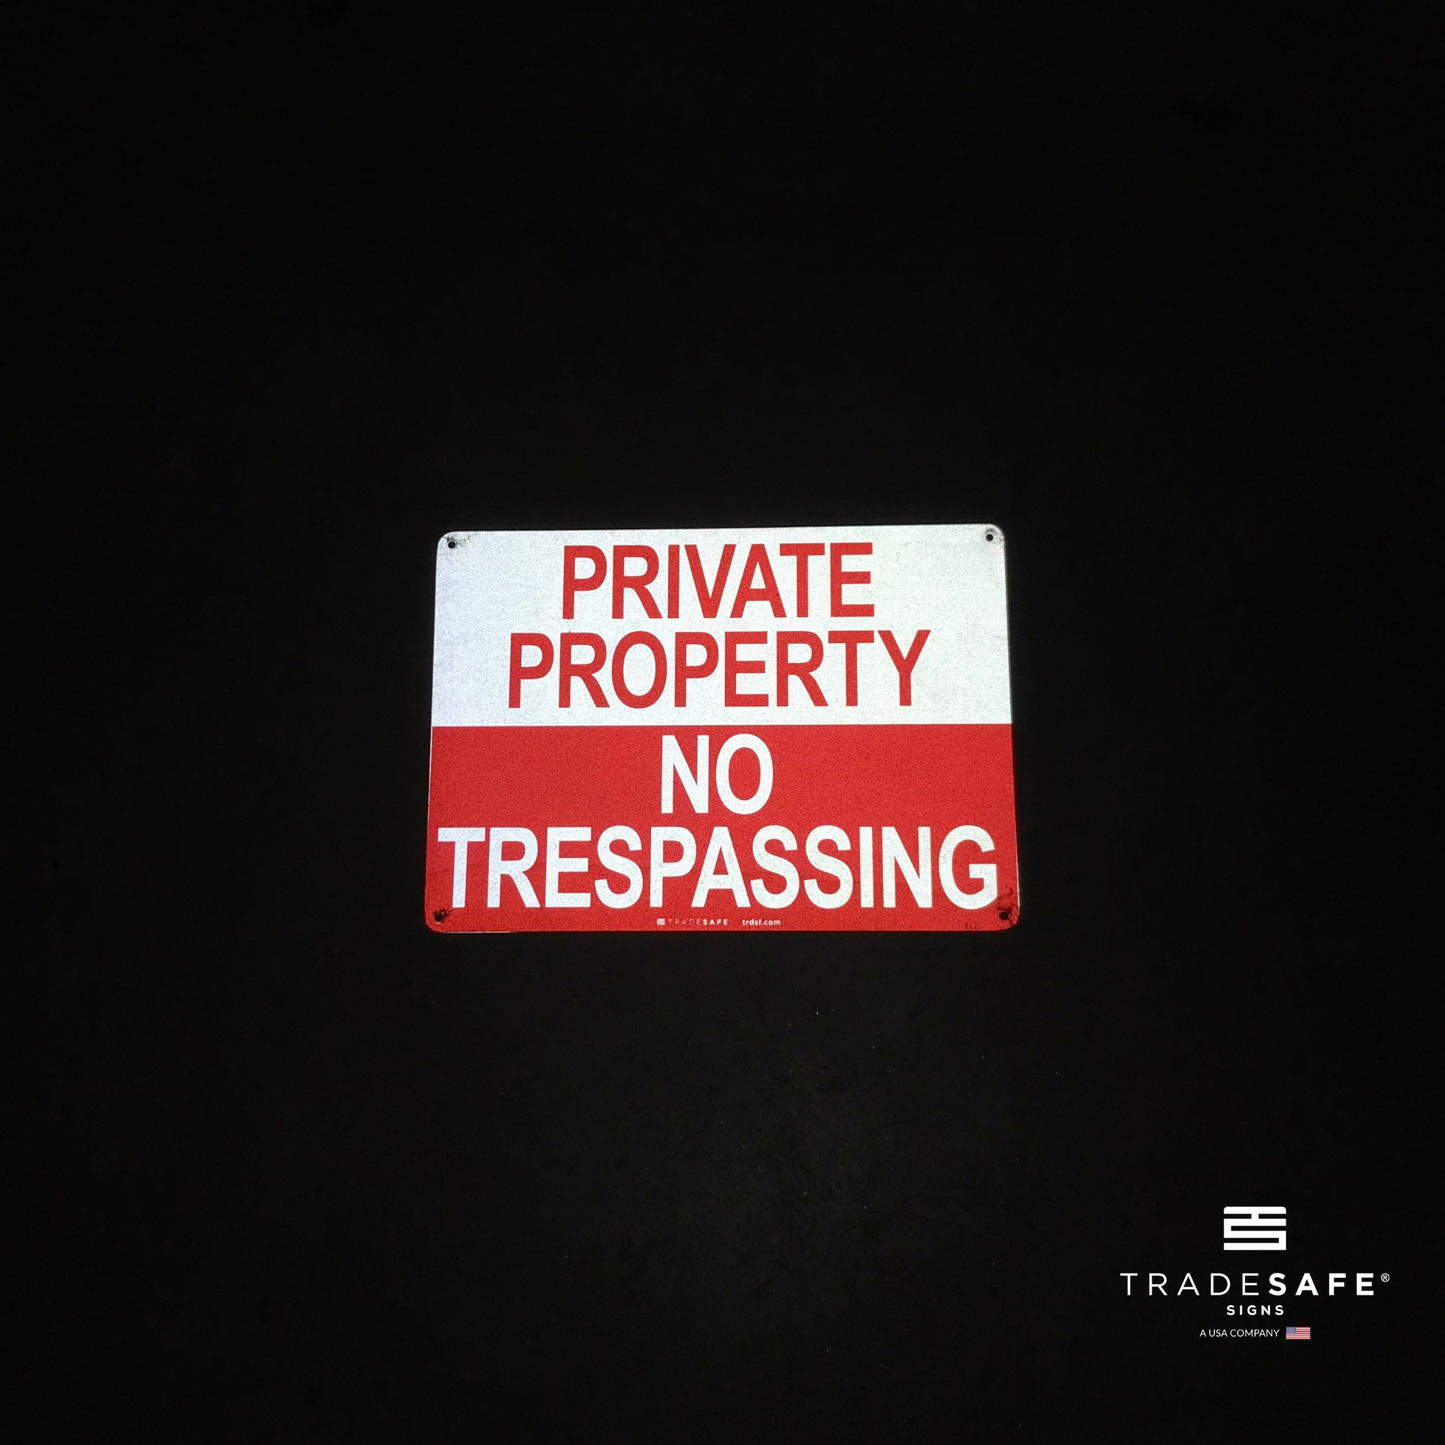 reflective attribute of private property sign on black background